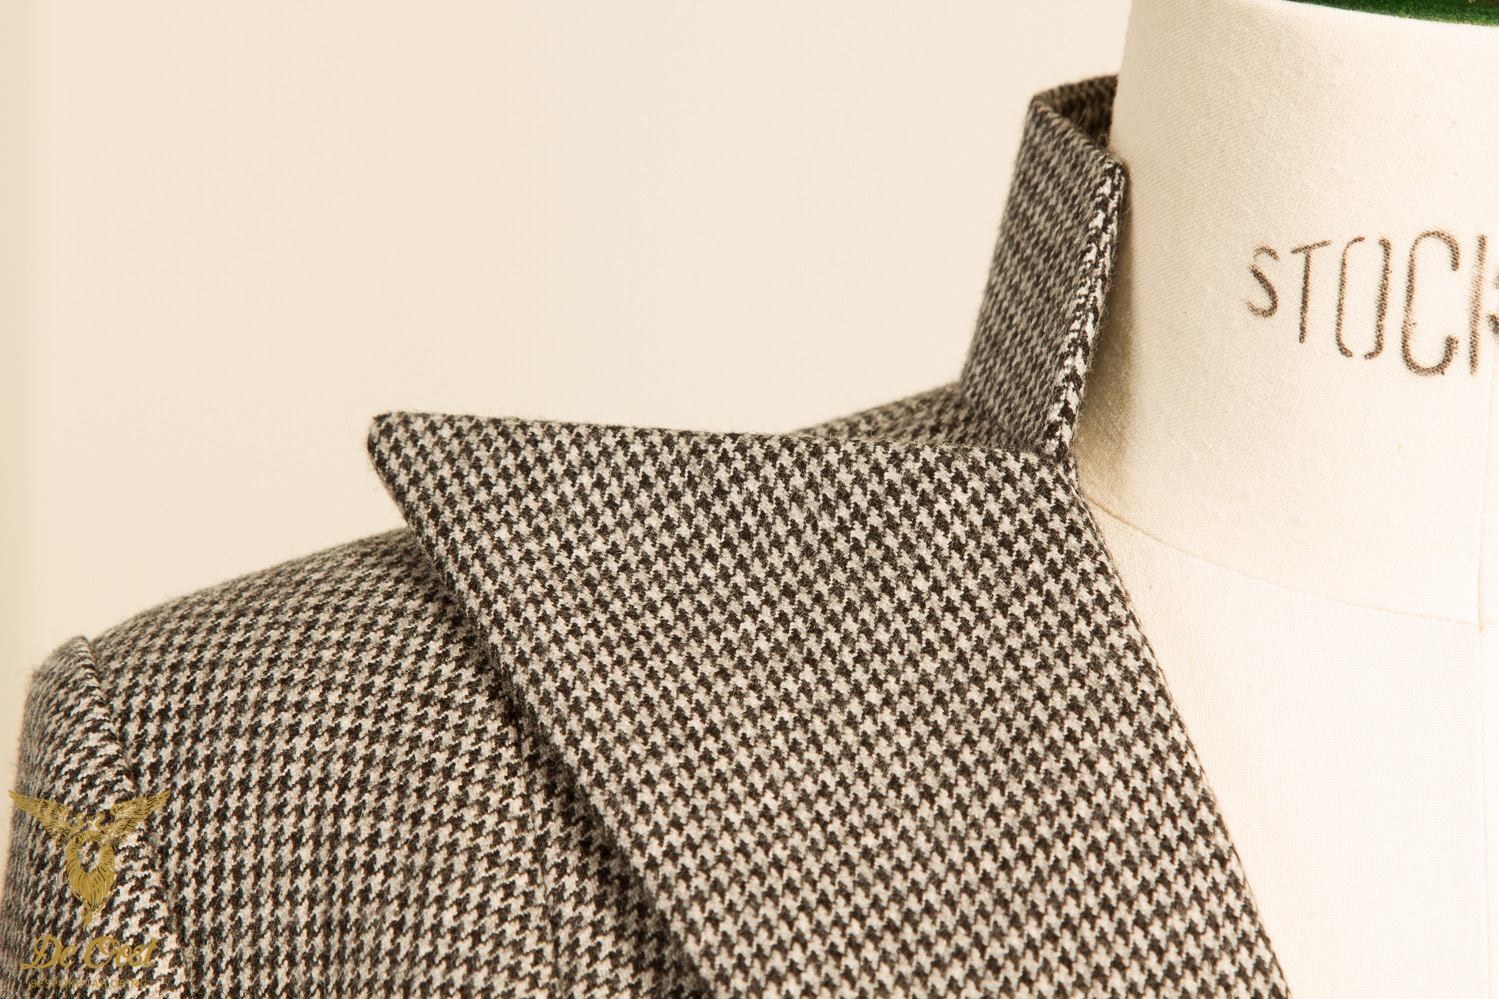 BESPOKE+DOUBLE+BREASTED+HOUNDSTOOTH+LADIES+JACKET+WITH+NOTCH+LAPELS+AND+BUTTONLESS+CUFFS..jpg